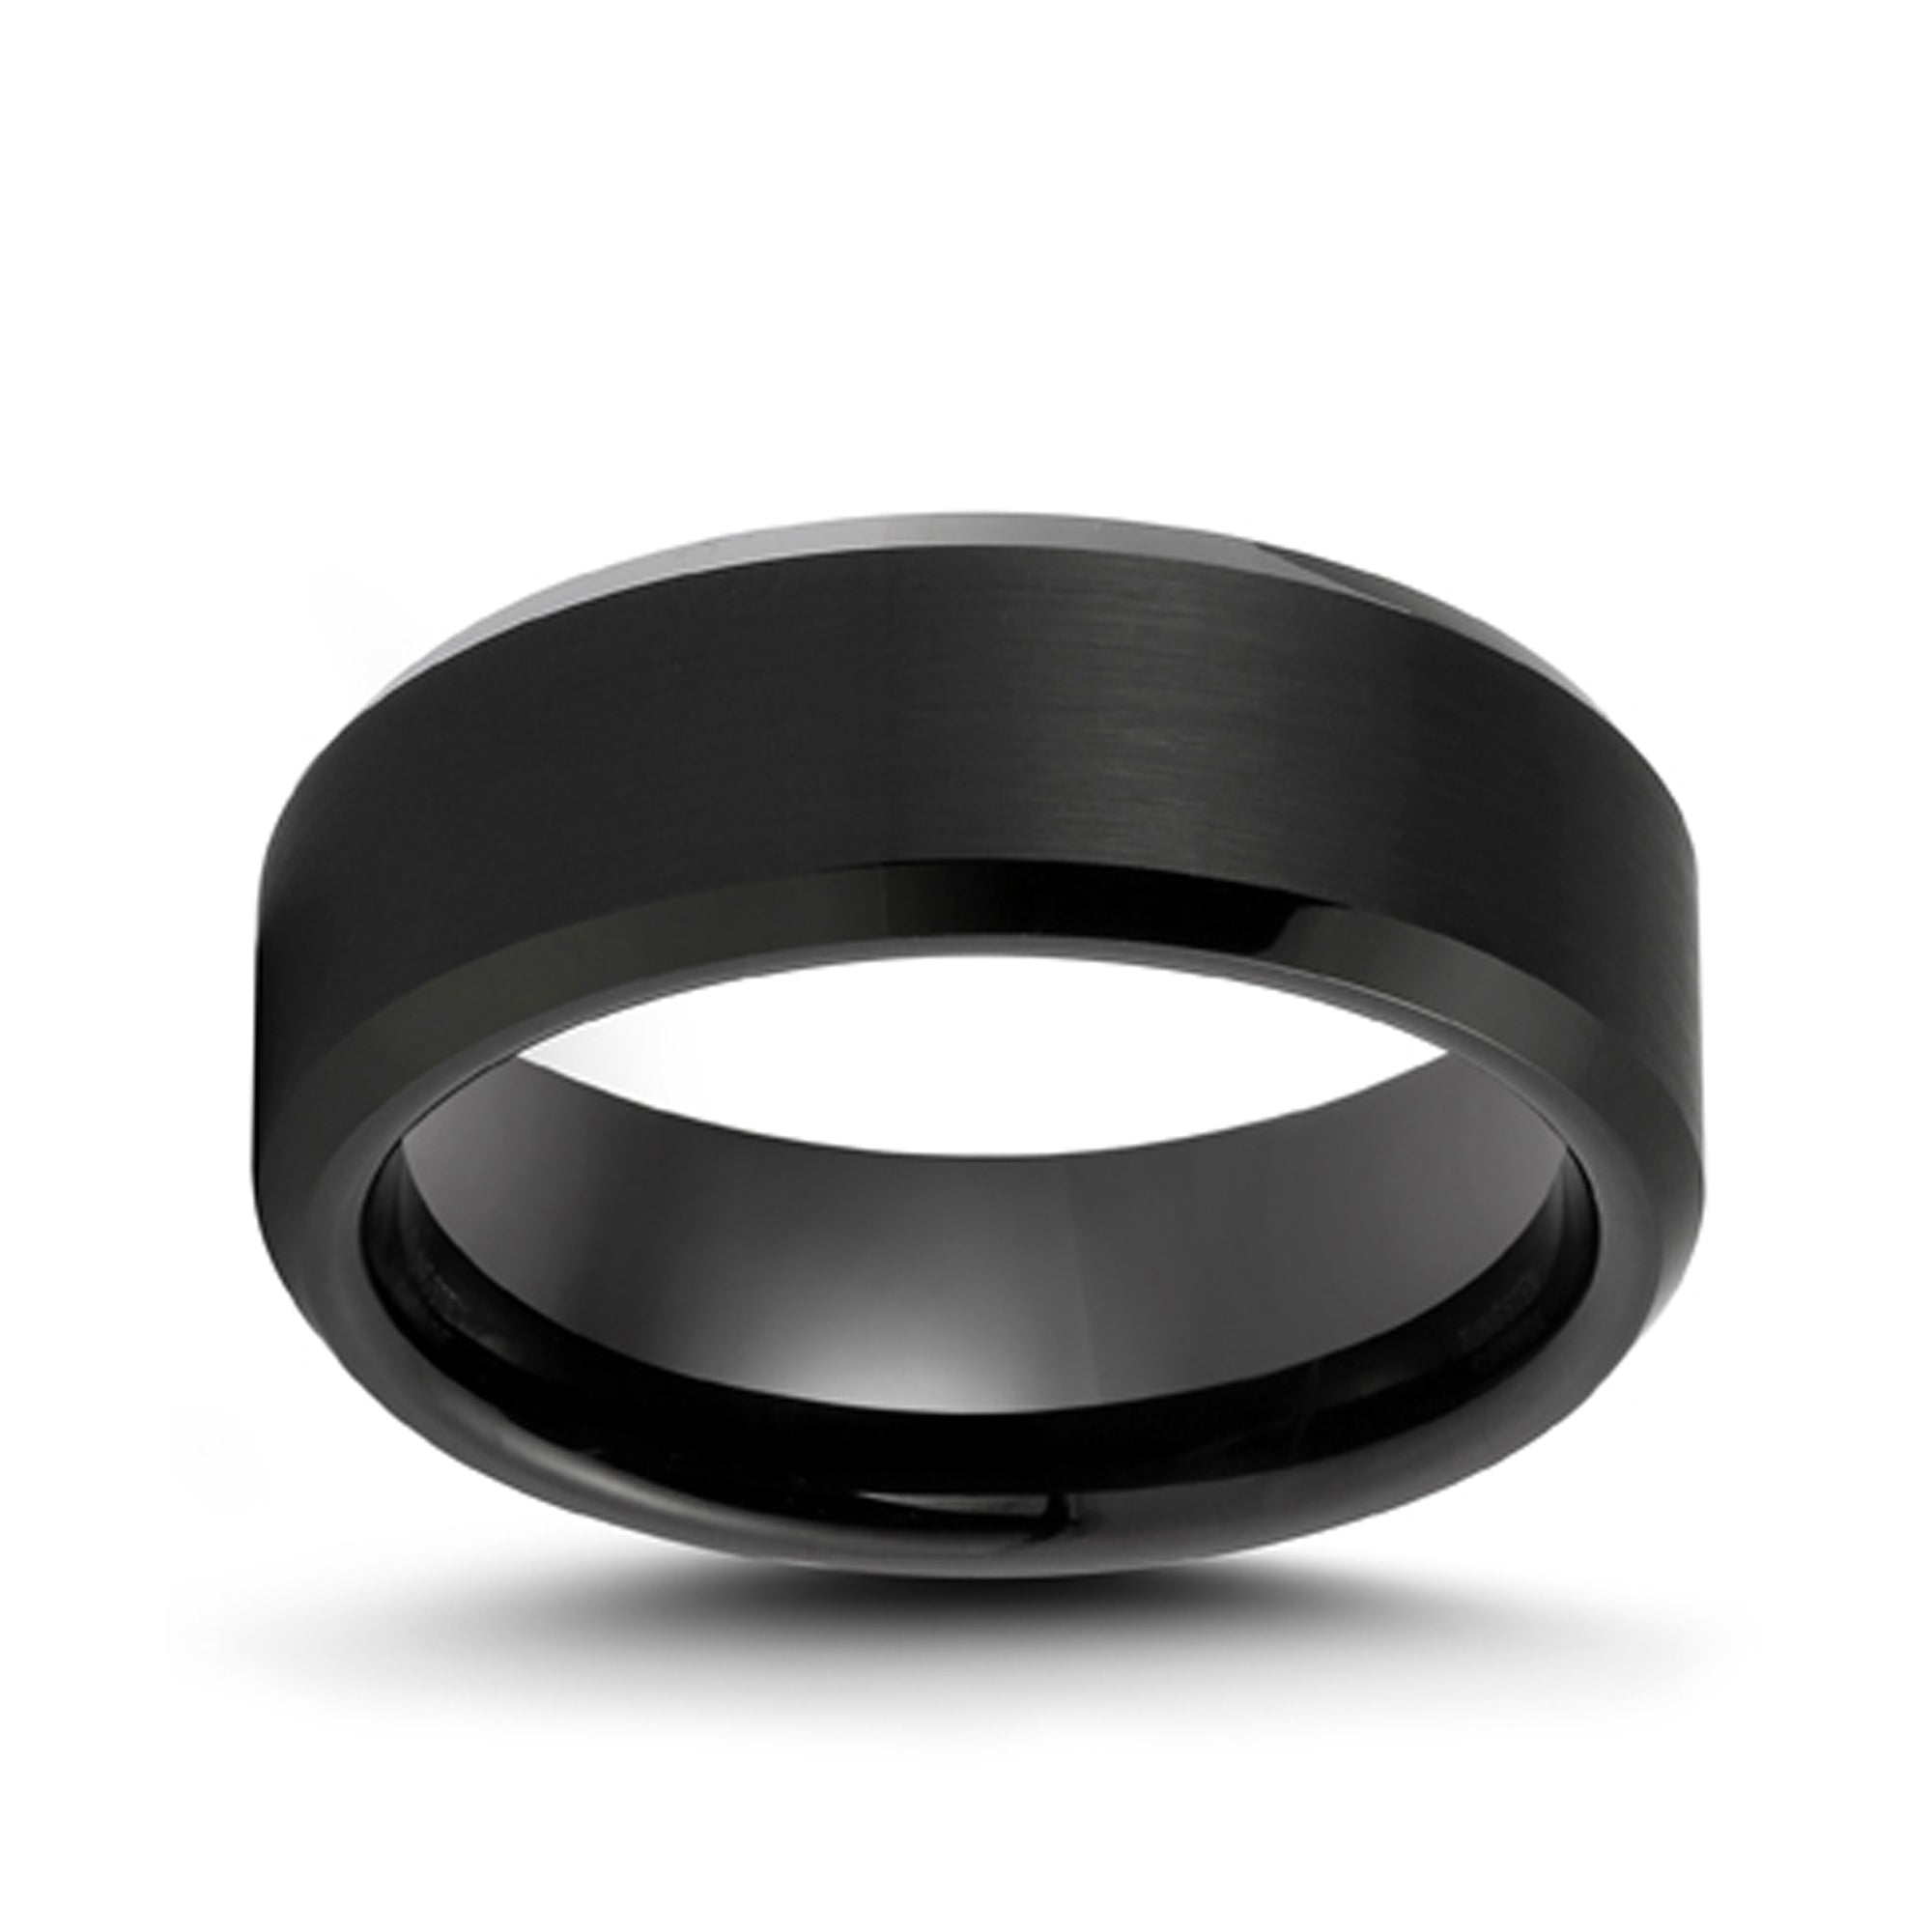 Black Matte Satin Finished Tungsten Carbide Ring with Polished Beveled Edge, 8MM